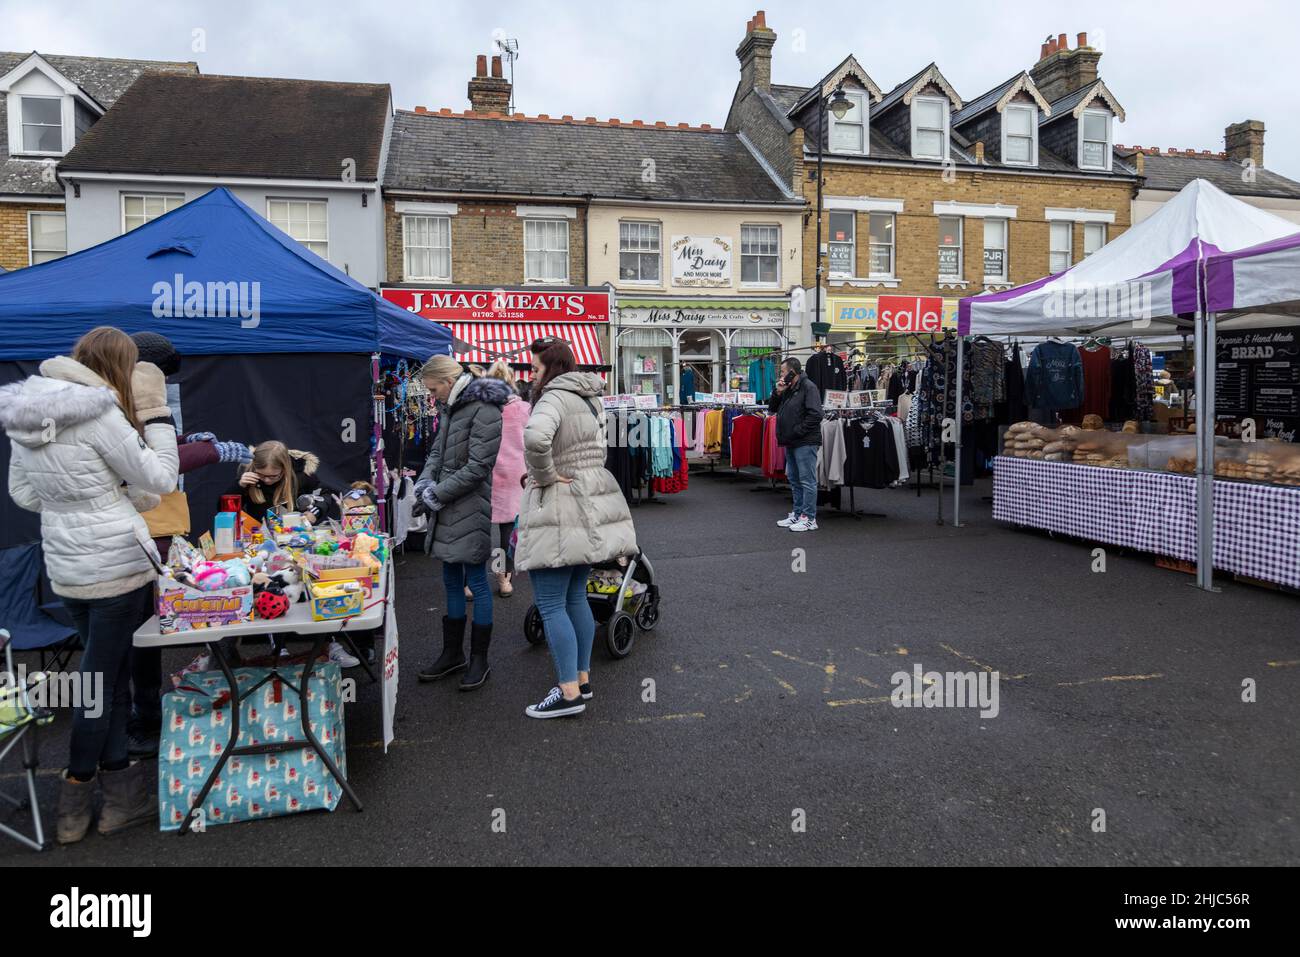 Rochford in Essex, where every Tuesday the old medieval town square the locals hold a market, dating back to 1752, England, United Kingdom Stock Photo